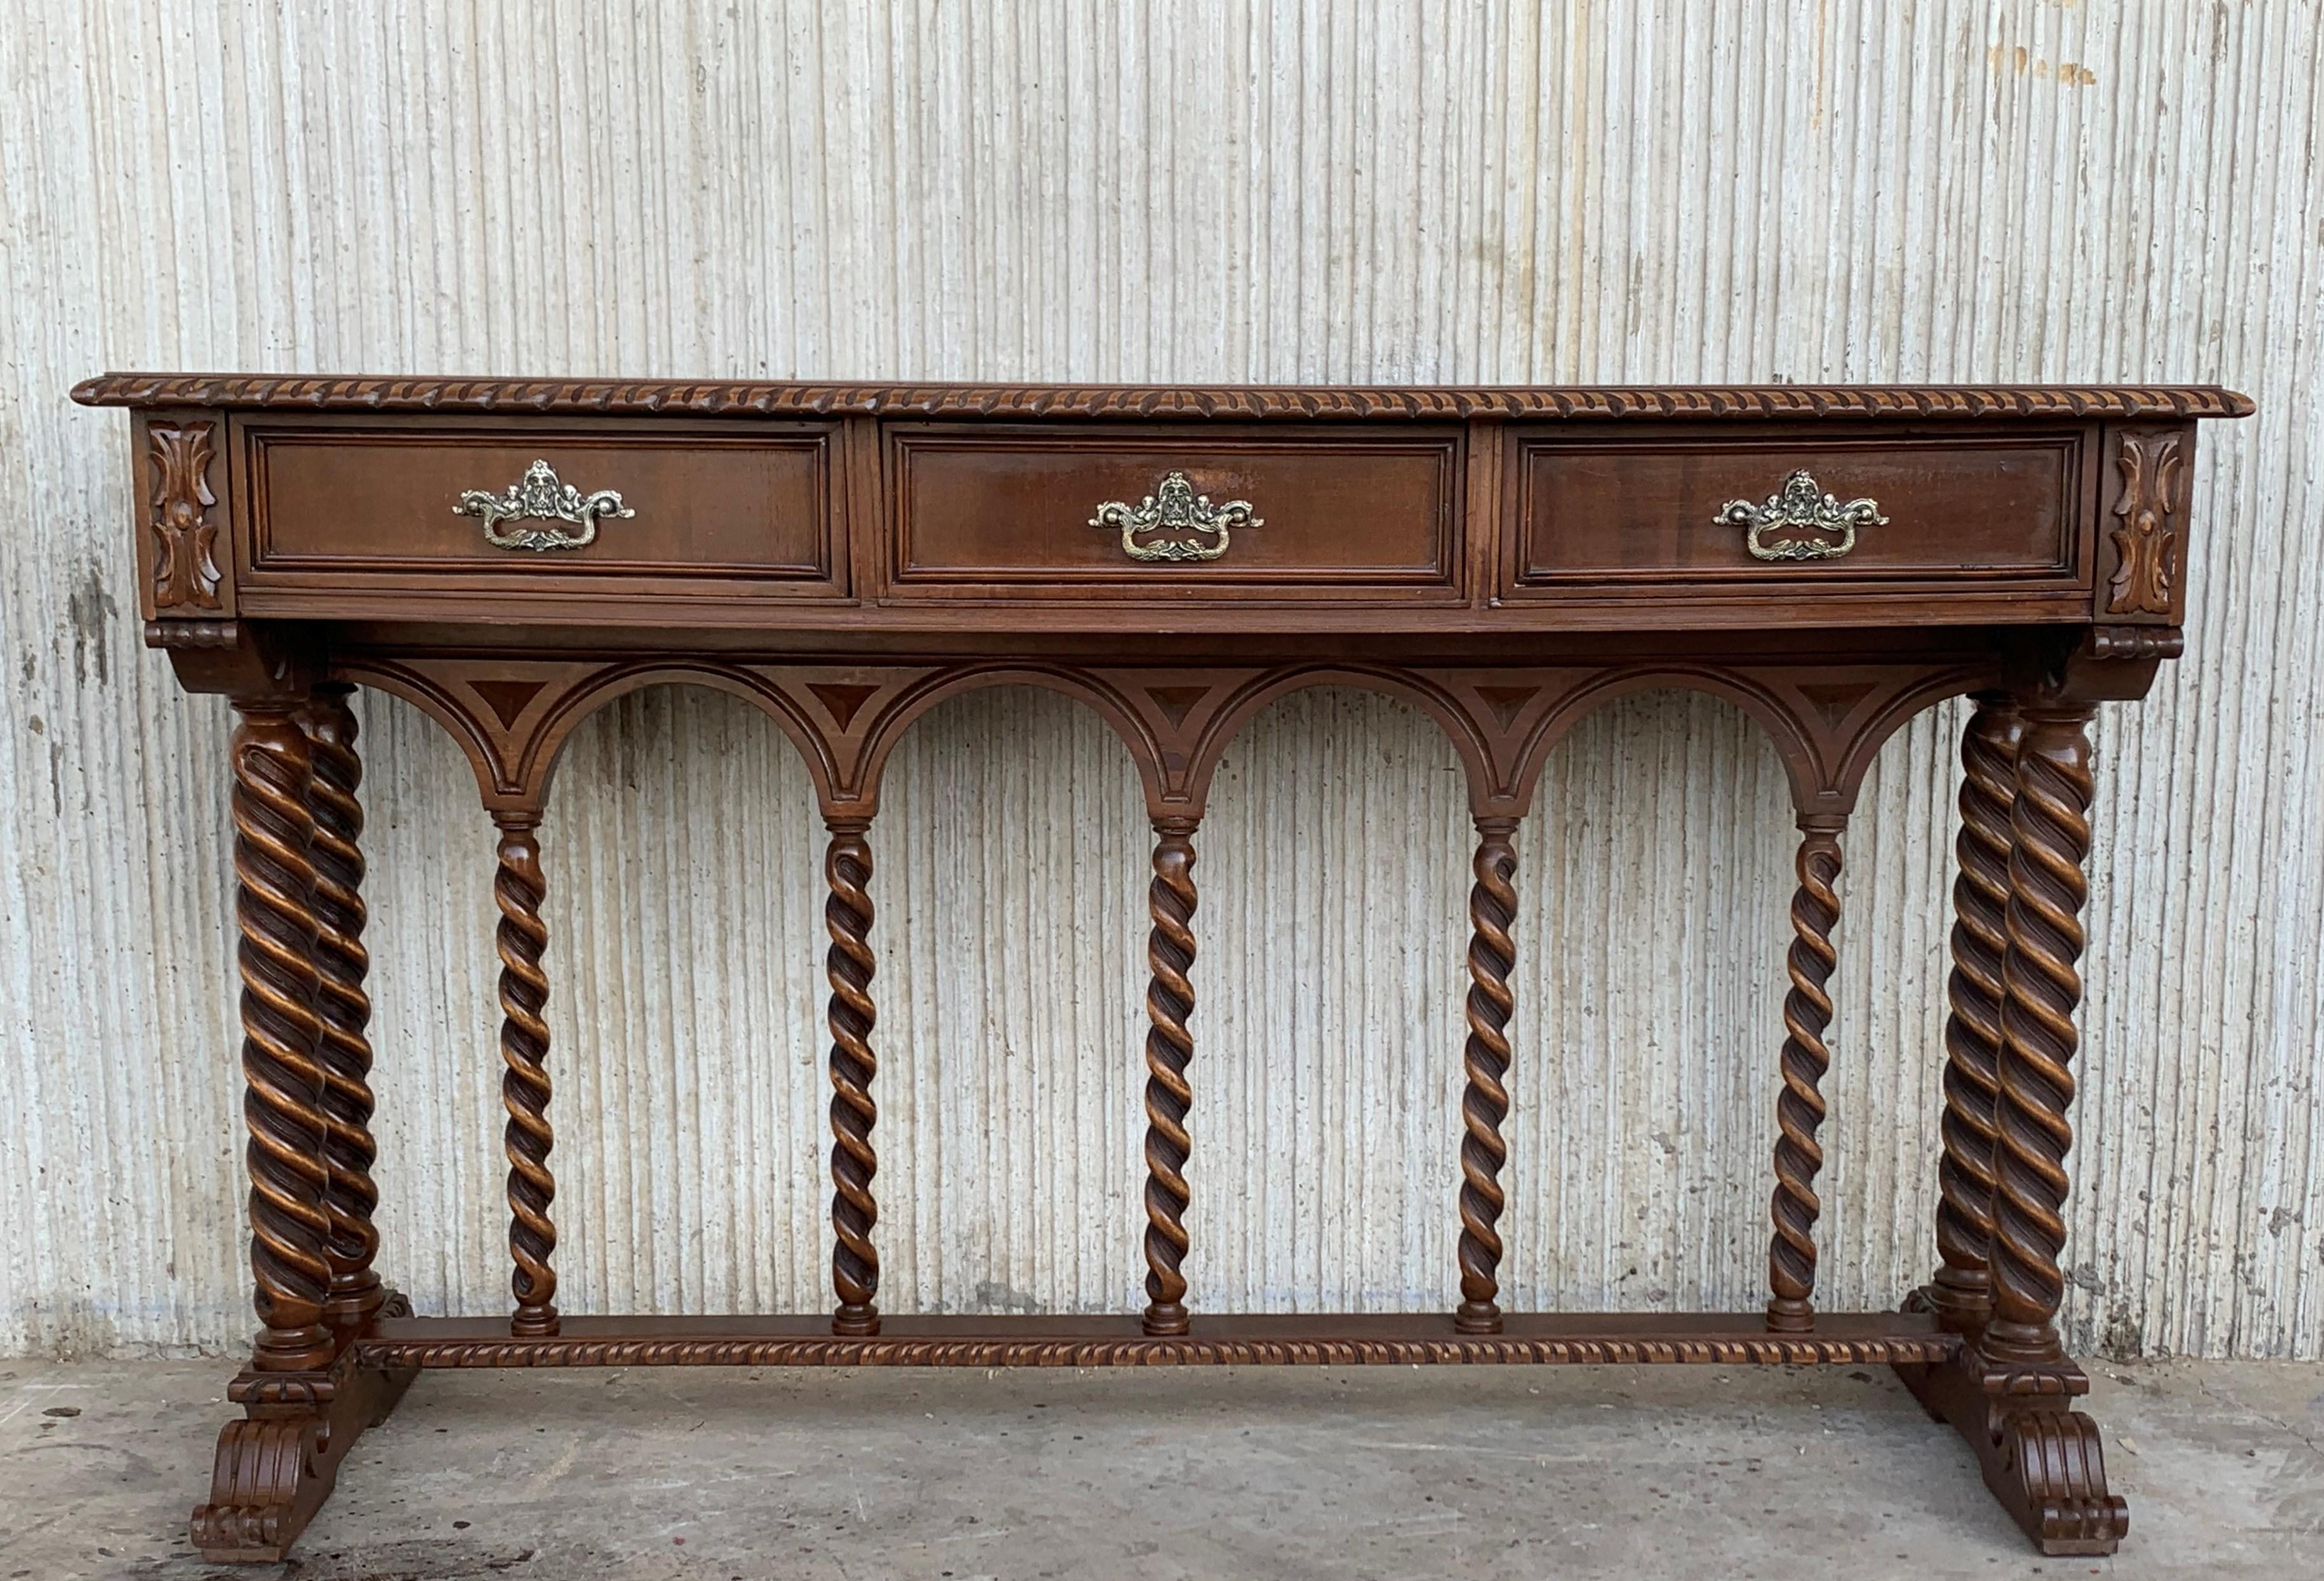 19th century Spanish console table with three carved drawers with bronze handles and solomonic columns and twist legs.